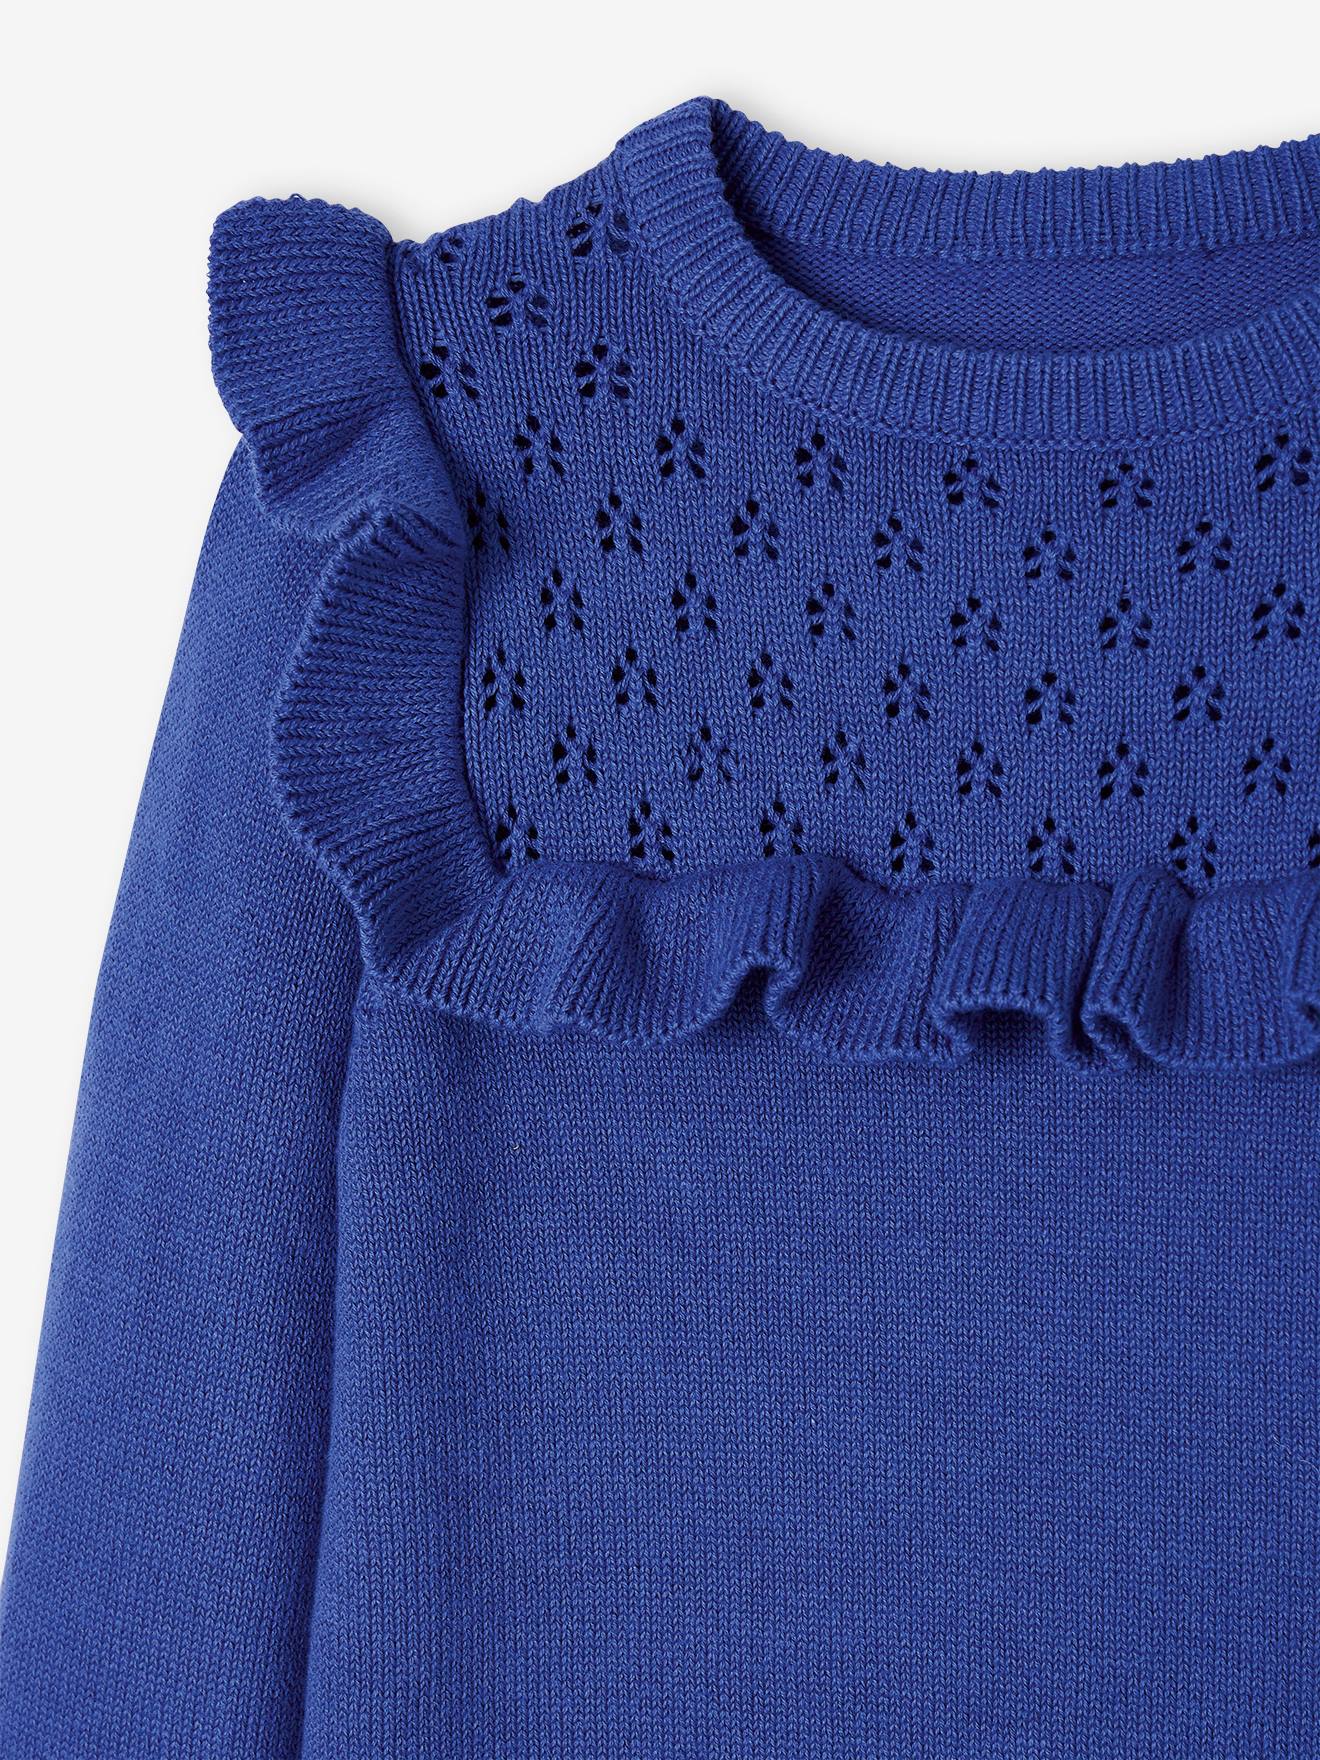 Jumper with Ruffle, Detail in Openwork Knit, for Girls - blue, Girls